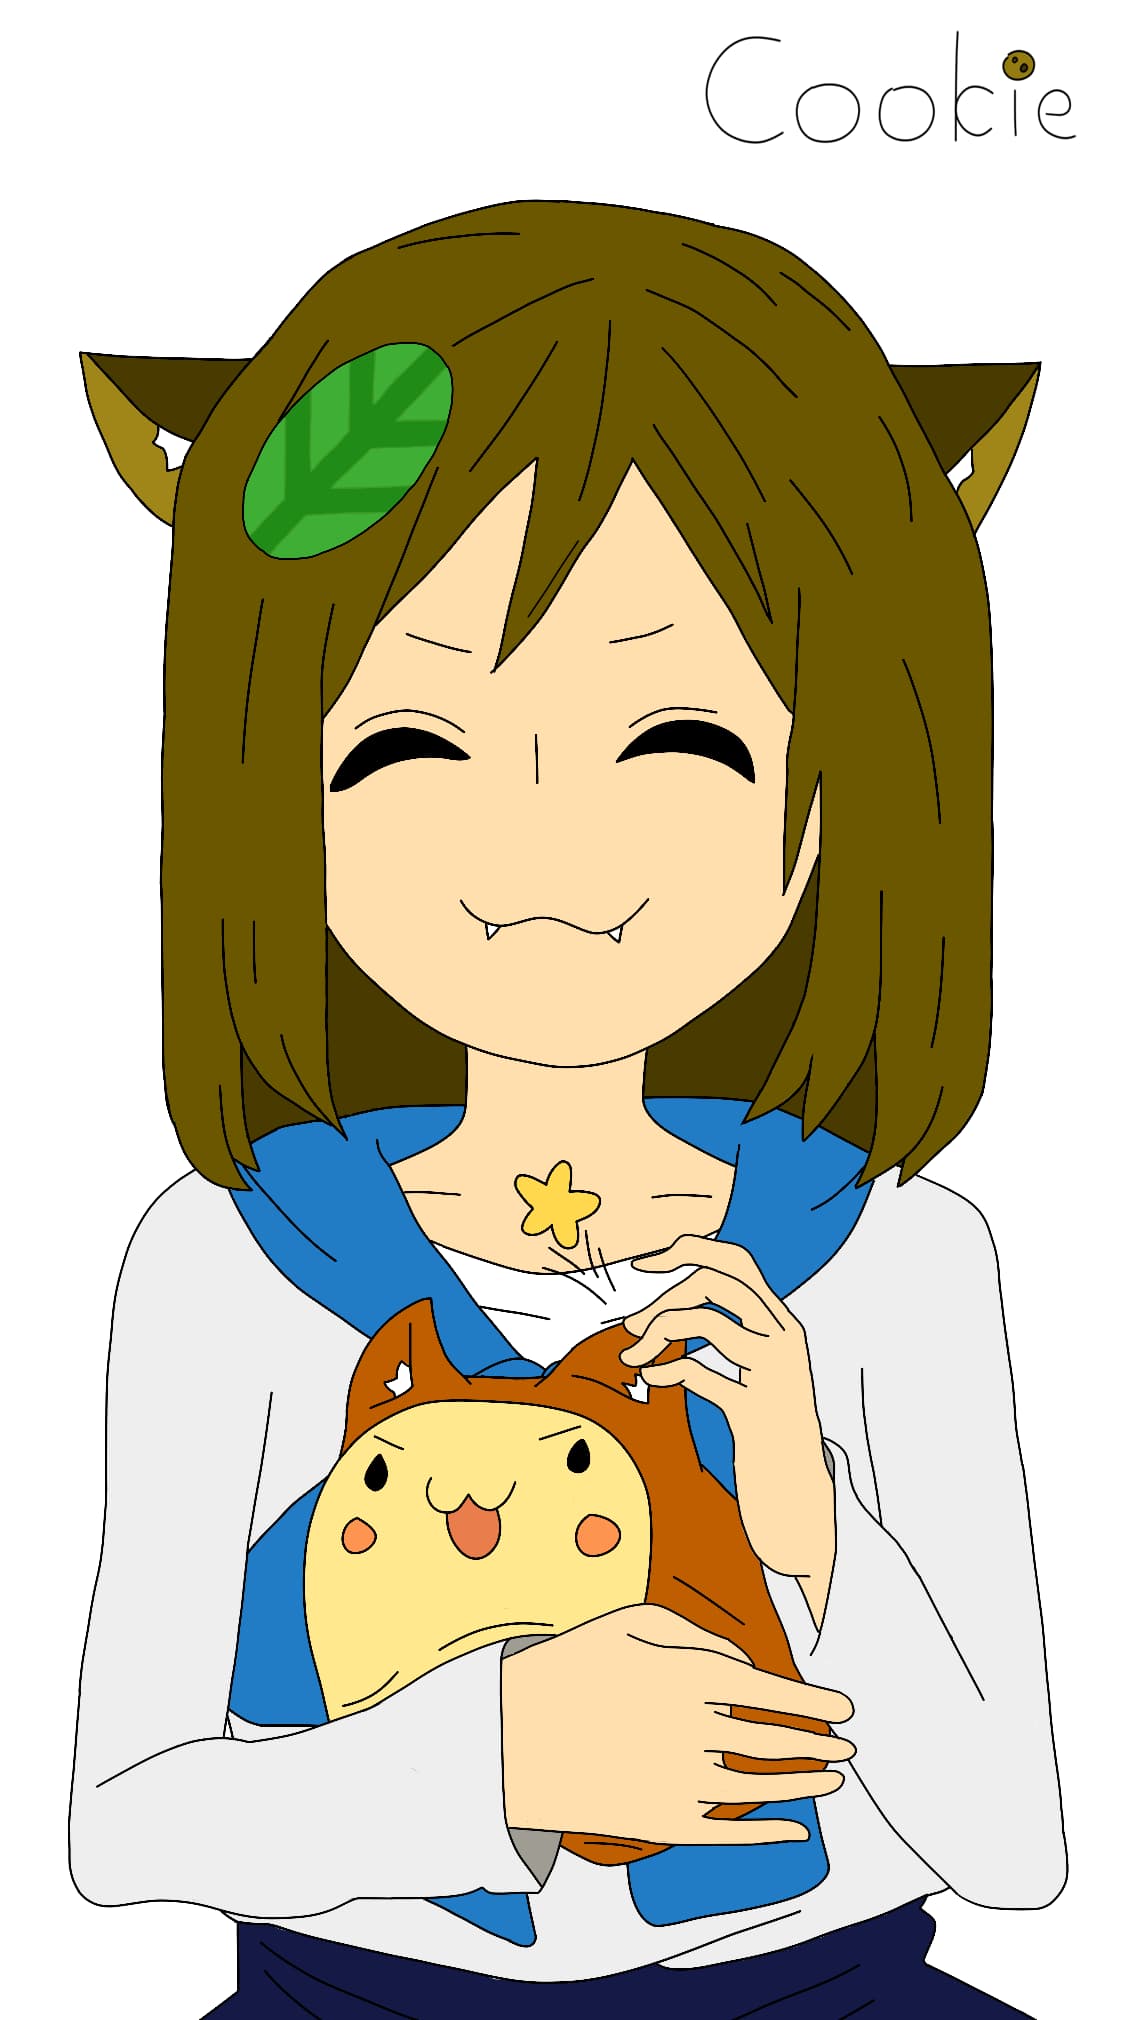 A colored portrait artwork of a light-skinned, smiling catgirl looking forward with shoulder-length straight brown hair with a hair tuft that comes down to right abofe her eyes, brown cat ears with white ear tufts, and my basil leaf design as a hairpiece. She's wearing a sailor uniform (loose, long-sleeved white shirt and a blue neckerchief), with the top of a dark blue skirt barely visible. She's holding a nekopan (an anthropomorphic bread with a cate face and ears) in her right hand and rubbing it's ear with her left hand.